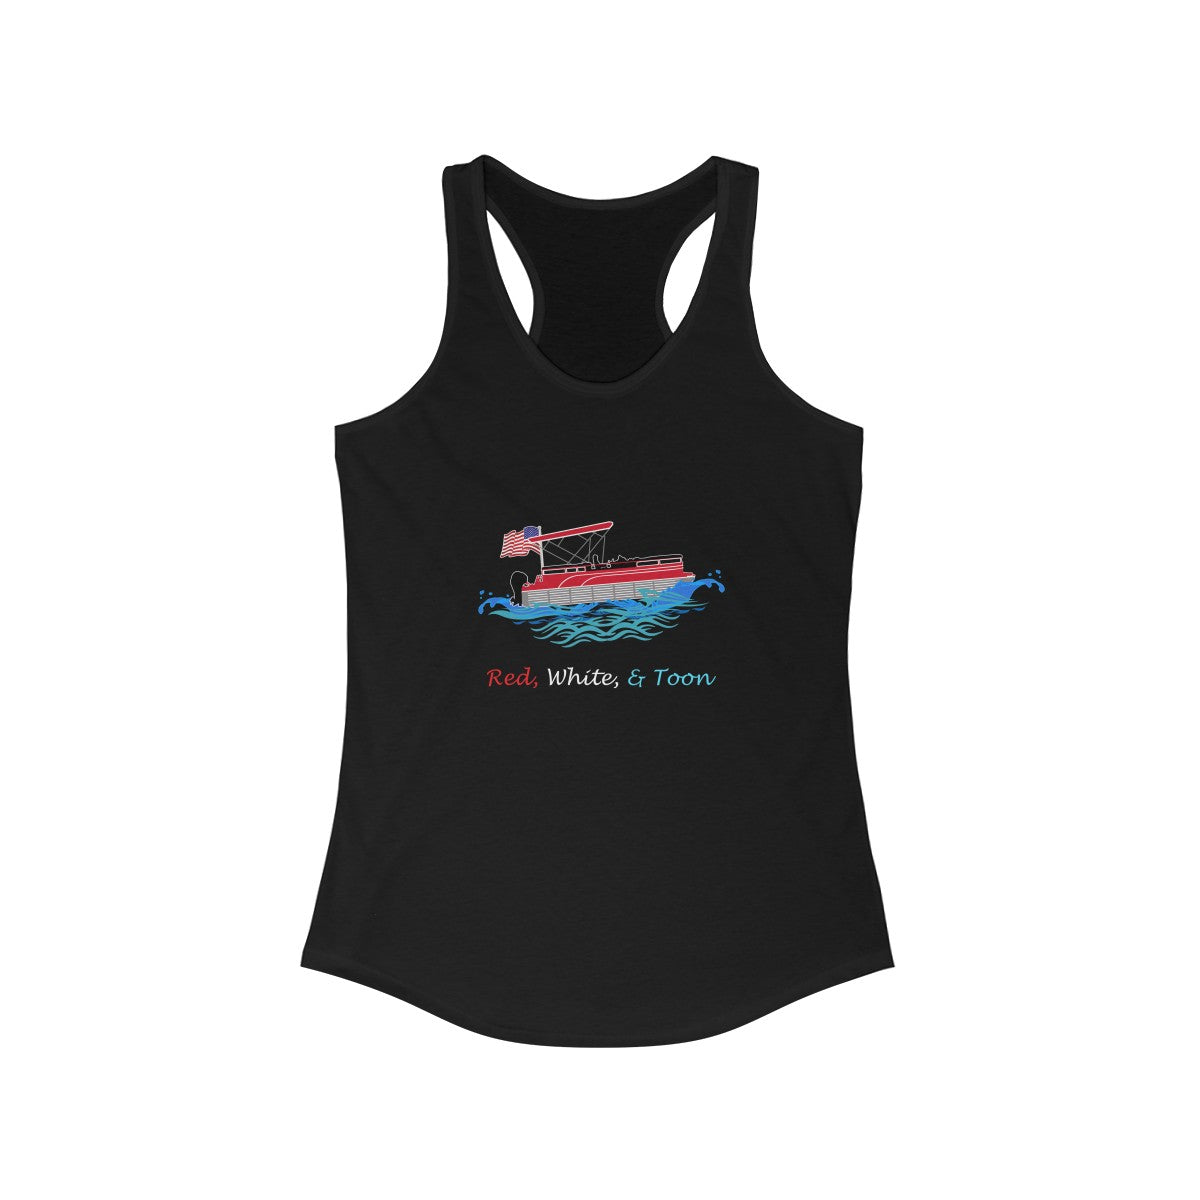 Red White and Toon - Pontoon Girl 4th of July Tank Top!